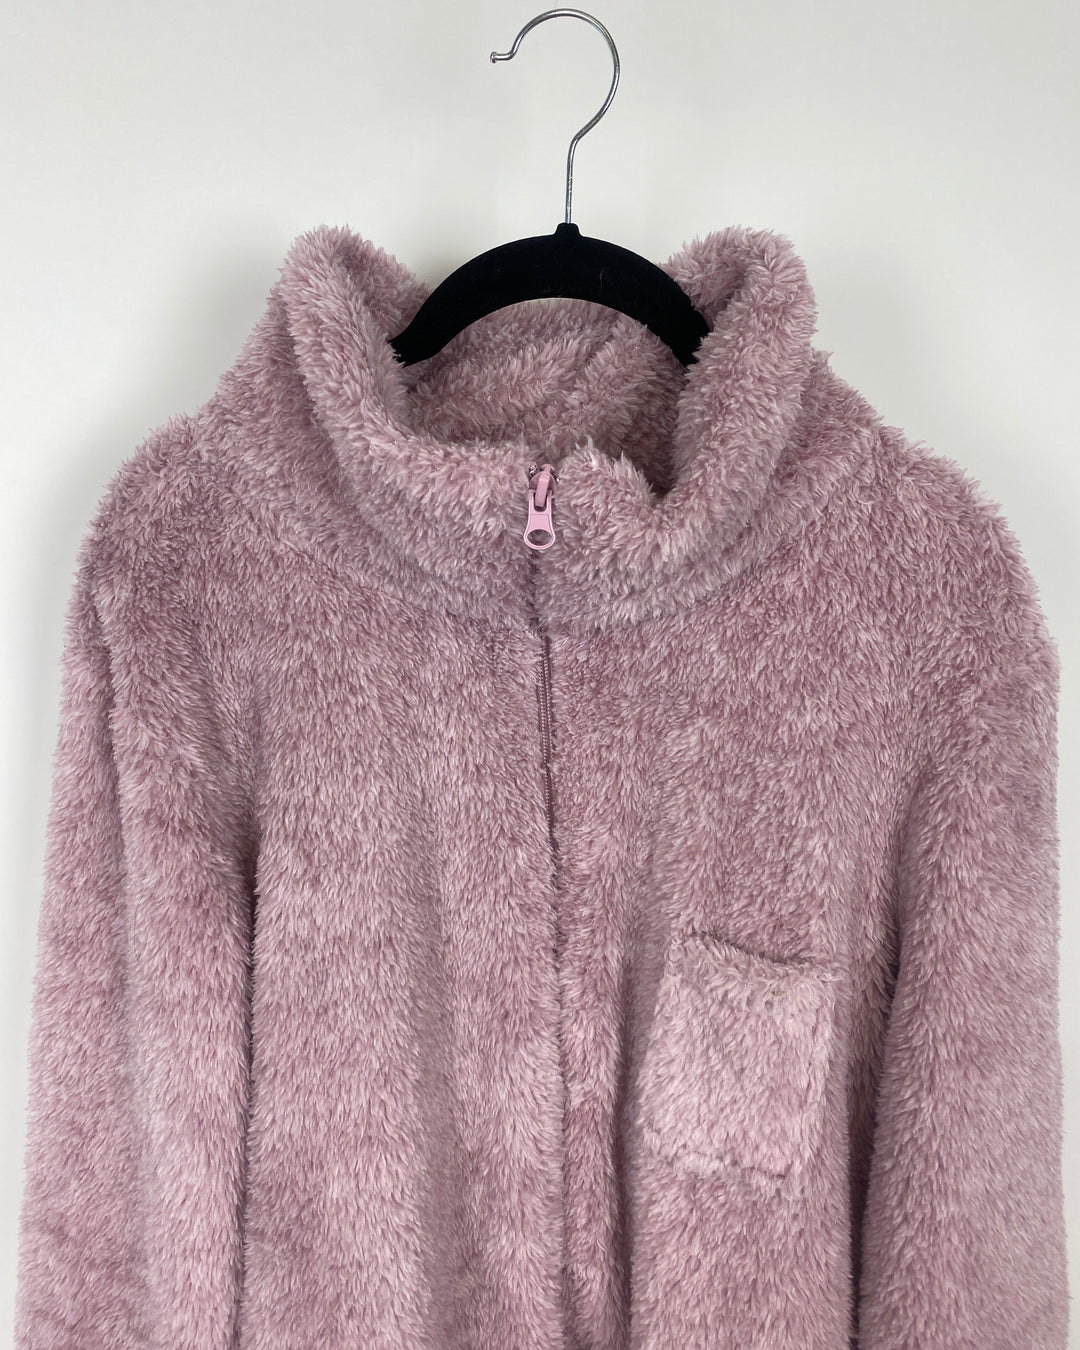 Pink Fuzzy Robe - Oversized Small